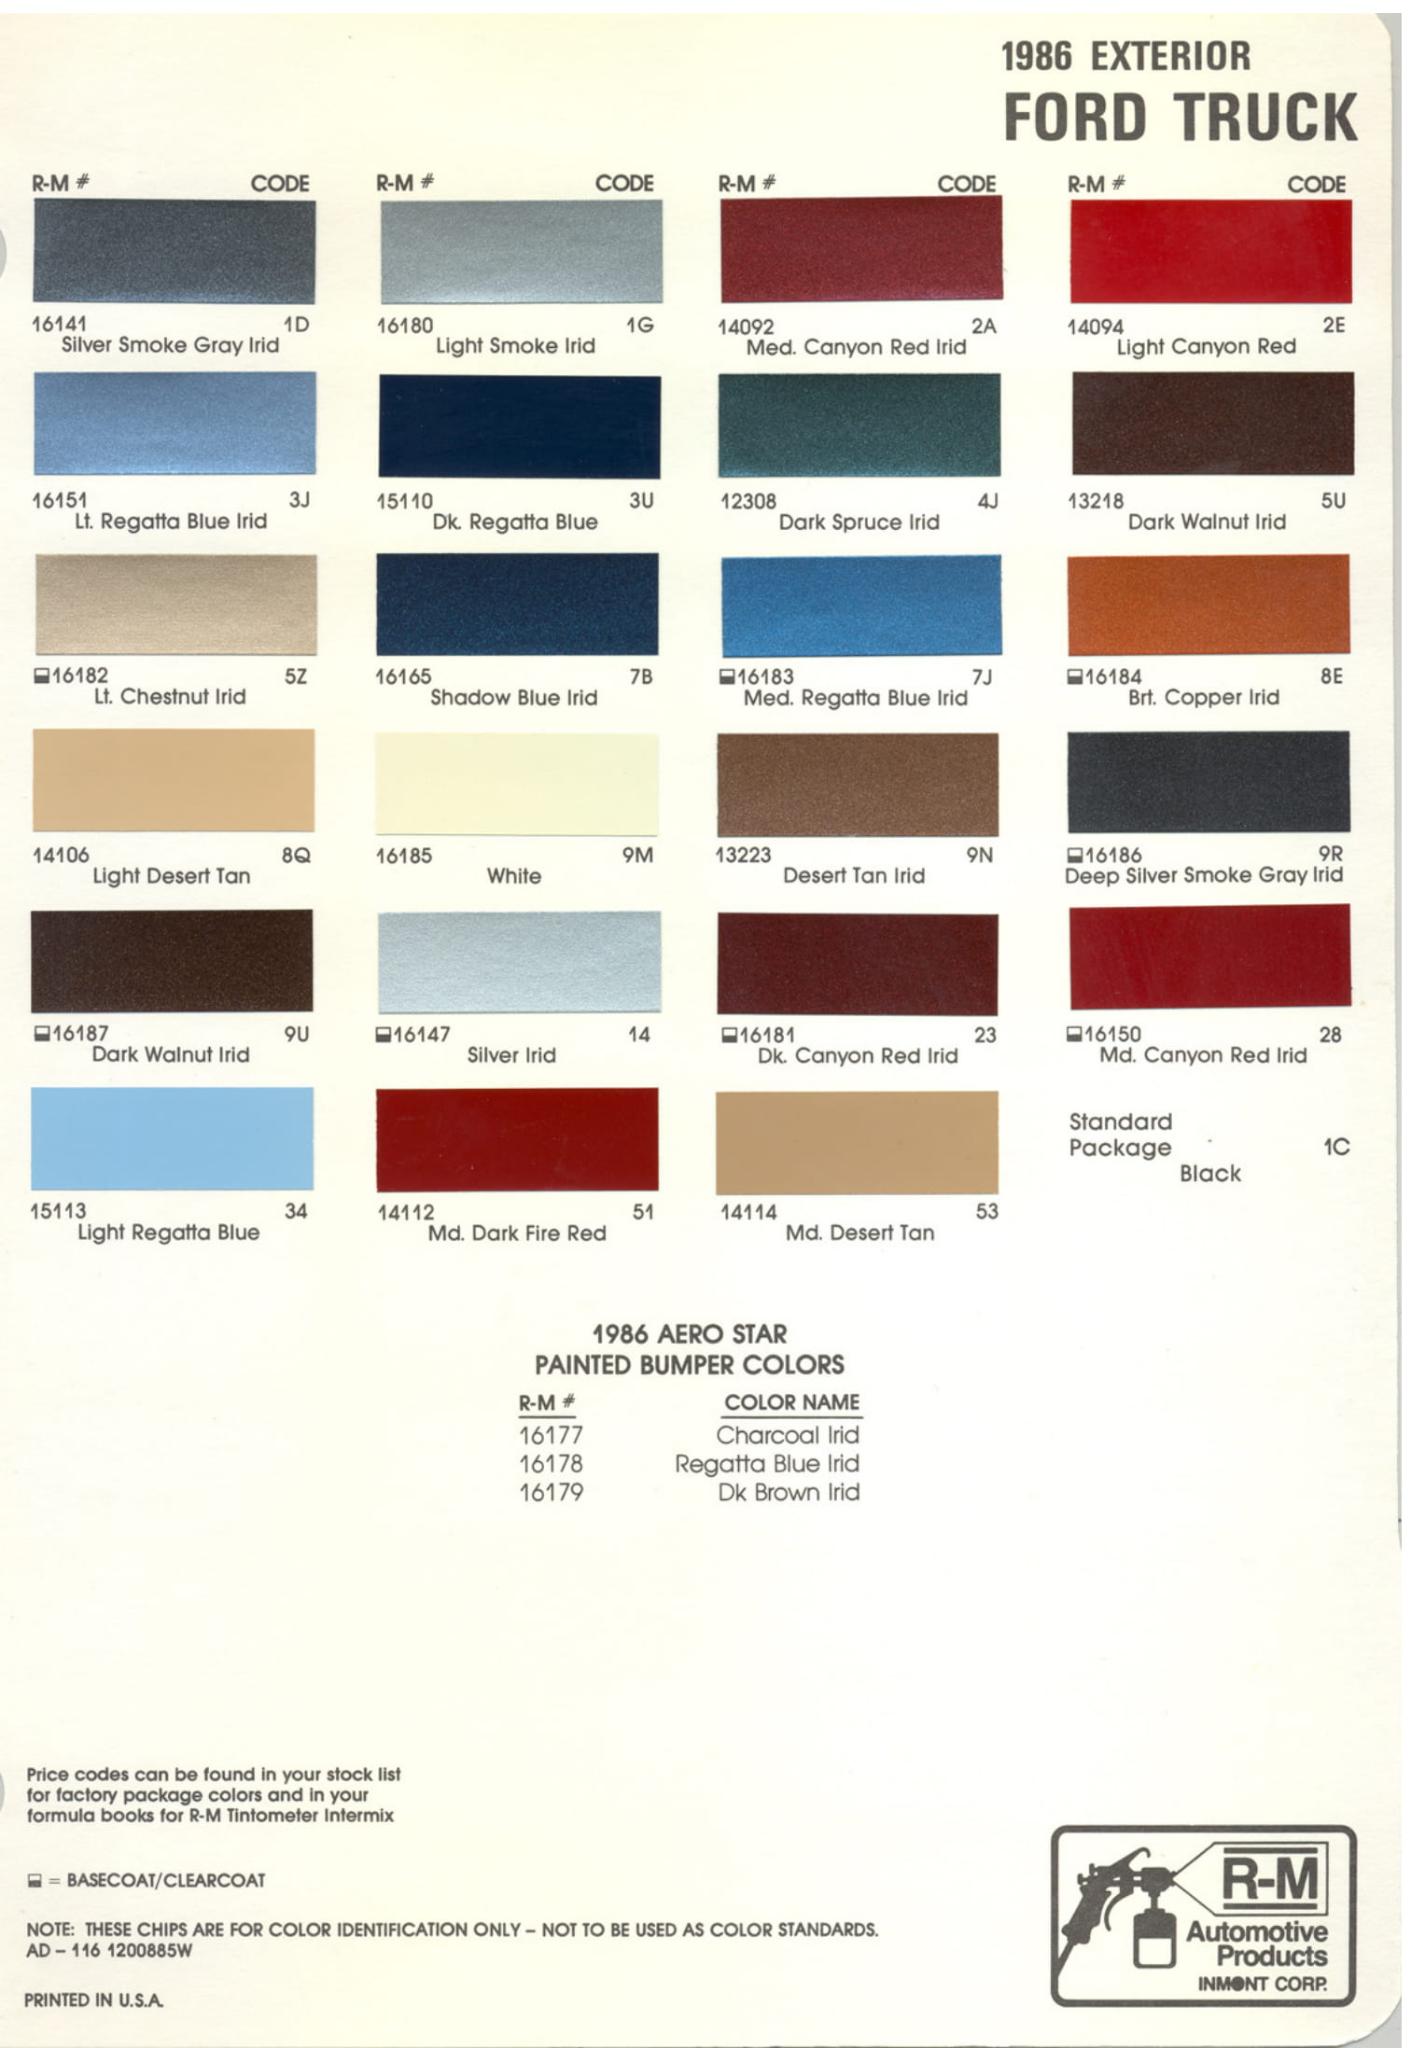 paint color examples, their ordering codes, and mixing stock numbers for Ford, Lincoln & Mercury Vehicles